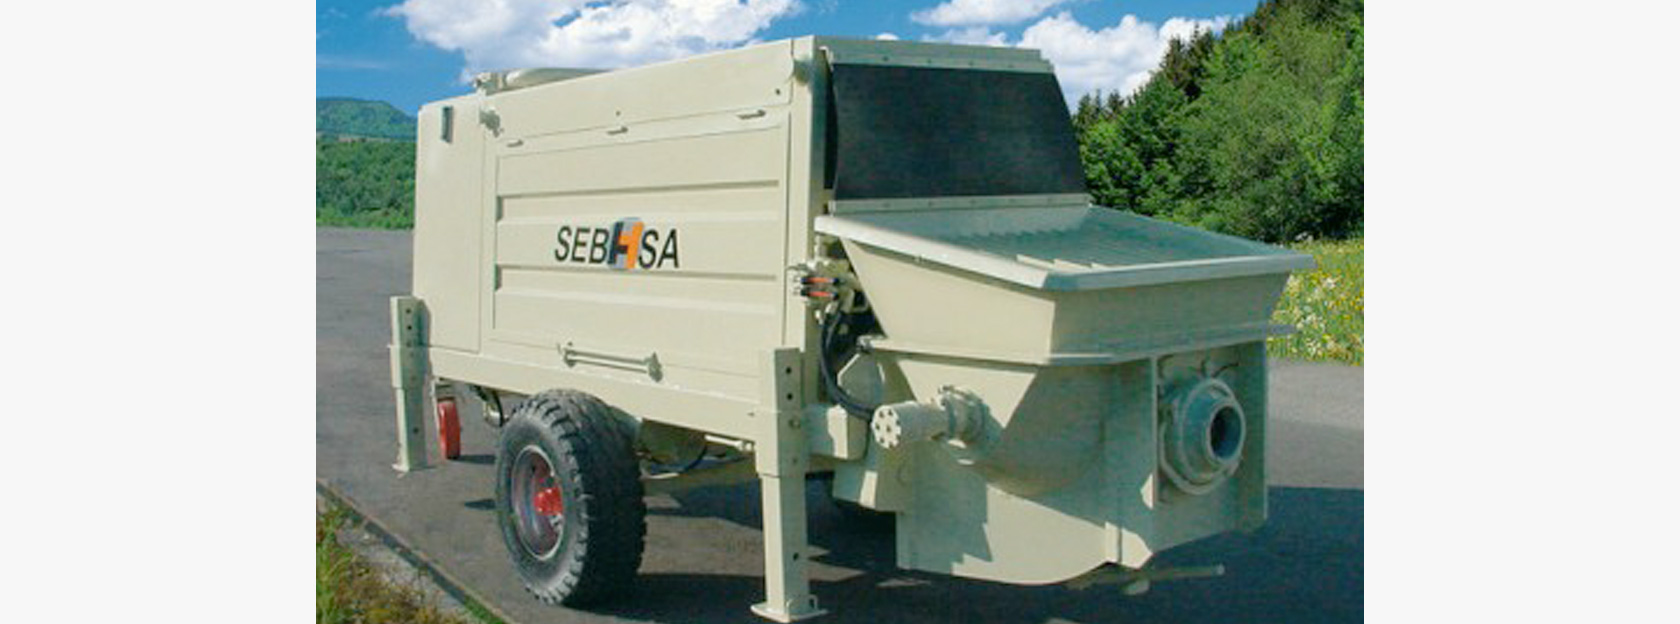 SEBHSA offers a wide variety of high quality and versatile concrete pumps to meet all the concrete pumping needs of any project.